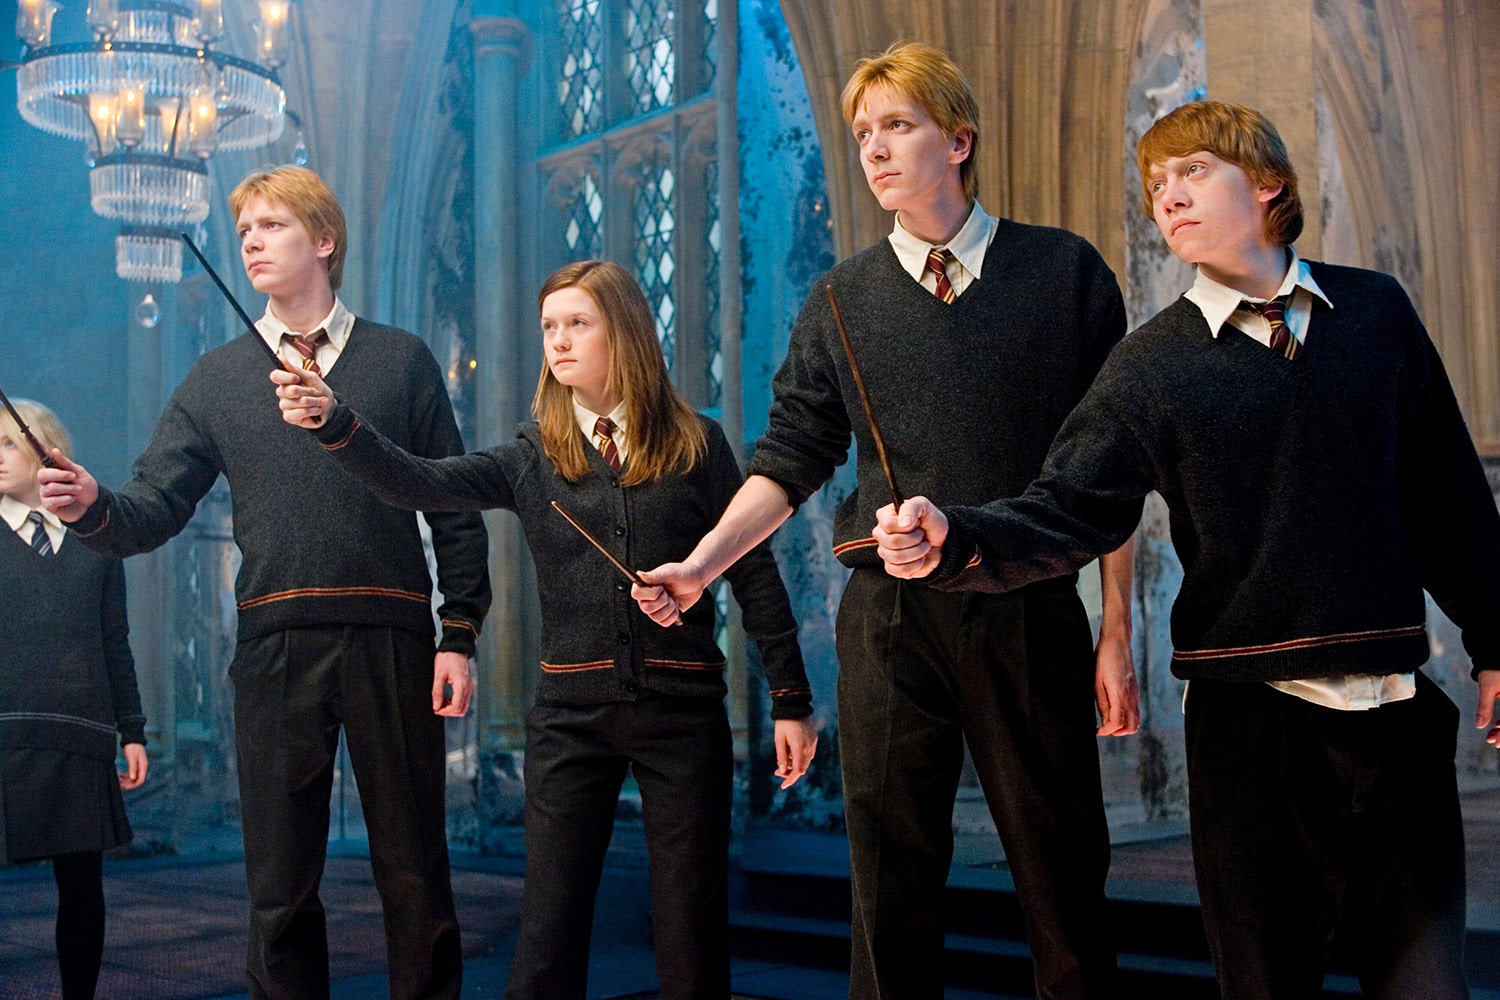 Luna, Fred, Ginny, George and Ron in the Room of Requirement